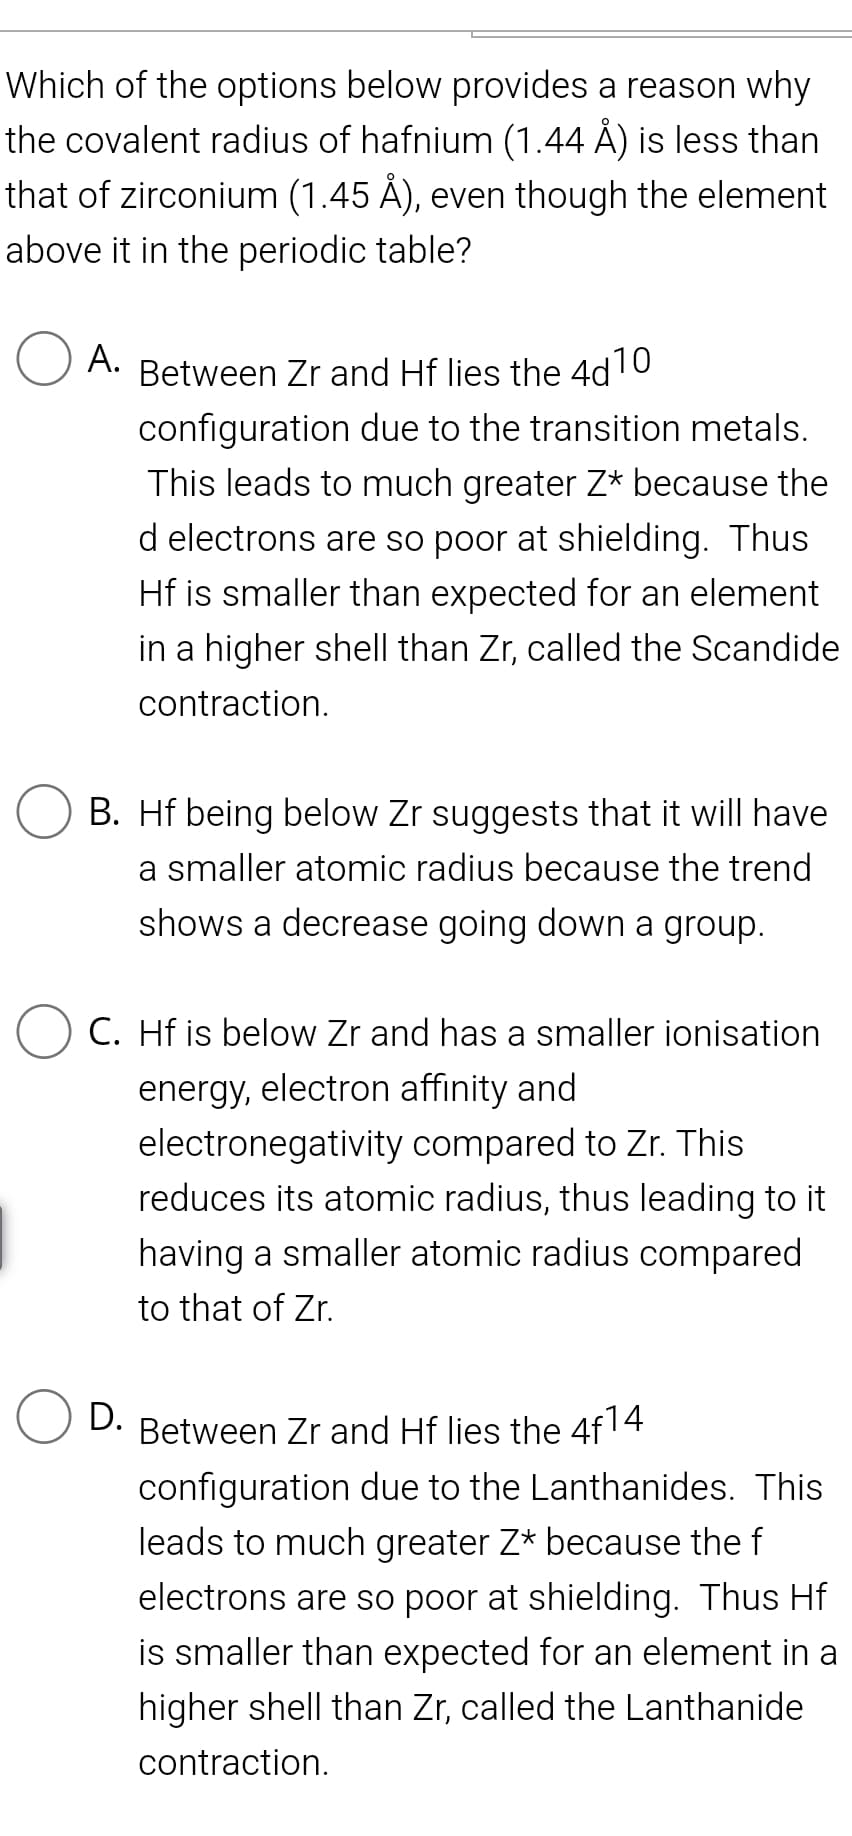 Which of the options below provides a reason why
the covalent radius of hafnium (1.44 Å) is less than
that of zirconium (1.45 Å), even though the element
above it in the periodic table?
A.
Between Zr and Hf lies the 4d10
configuration due to the transition metals.
This leads to much greater Z* because the
d electrons are so poor at shielding. Thus
Hf is smaller than expected for an element
in a higher shell than Zr, called the Scandide
contraction.
B. Hf being below Zr suggests that it will have
a smaller atomic radius because the trend
shows a decrease going down a group.
C. Hf is below Zr and has a smaller ionisation
energy, electron affinity and
electronegativity compared to Zr. This
reduces its atomic radius, thus leading to it
having a smaller atomic radius compared
to that of Zr.
D.
Between Zr and Hf lies the 4f14
configuration due to the Lanthanides. This
leads to much greater Z* because the f
electrons are so poor at shielding. Thus Hf
is smaller than expected for an element in a
higher shell than Zr, called the Lanthanide
contraction.